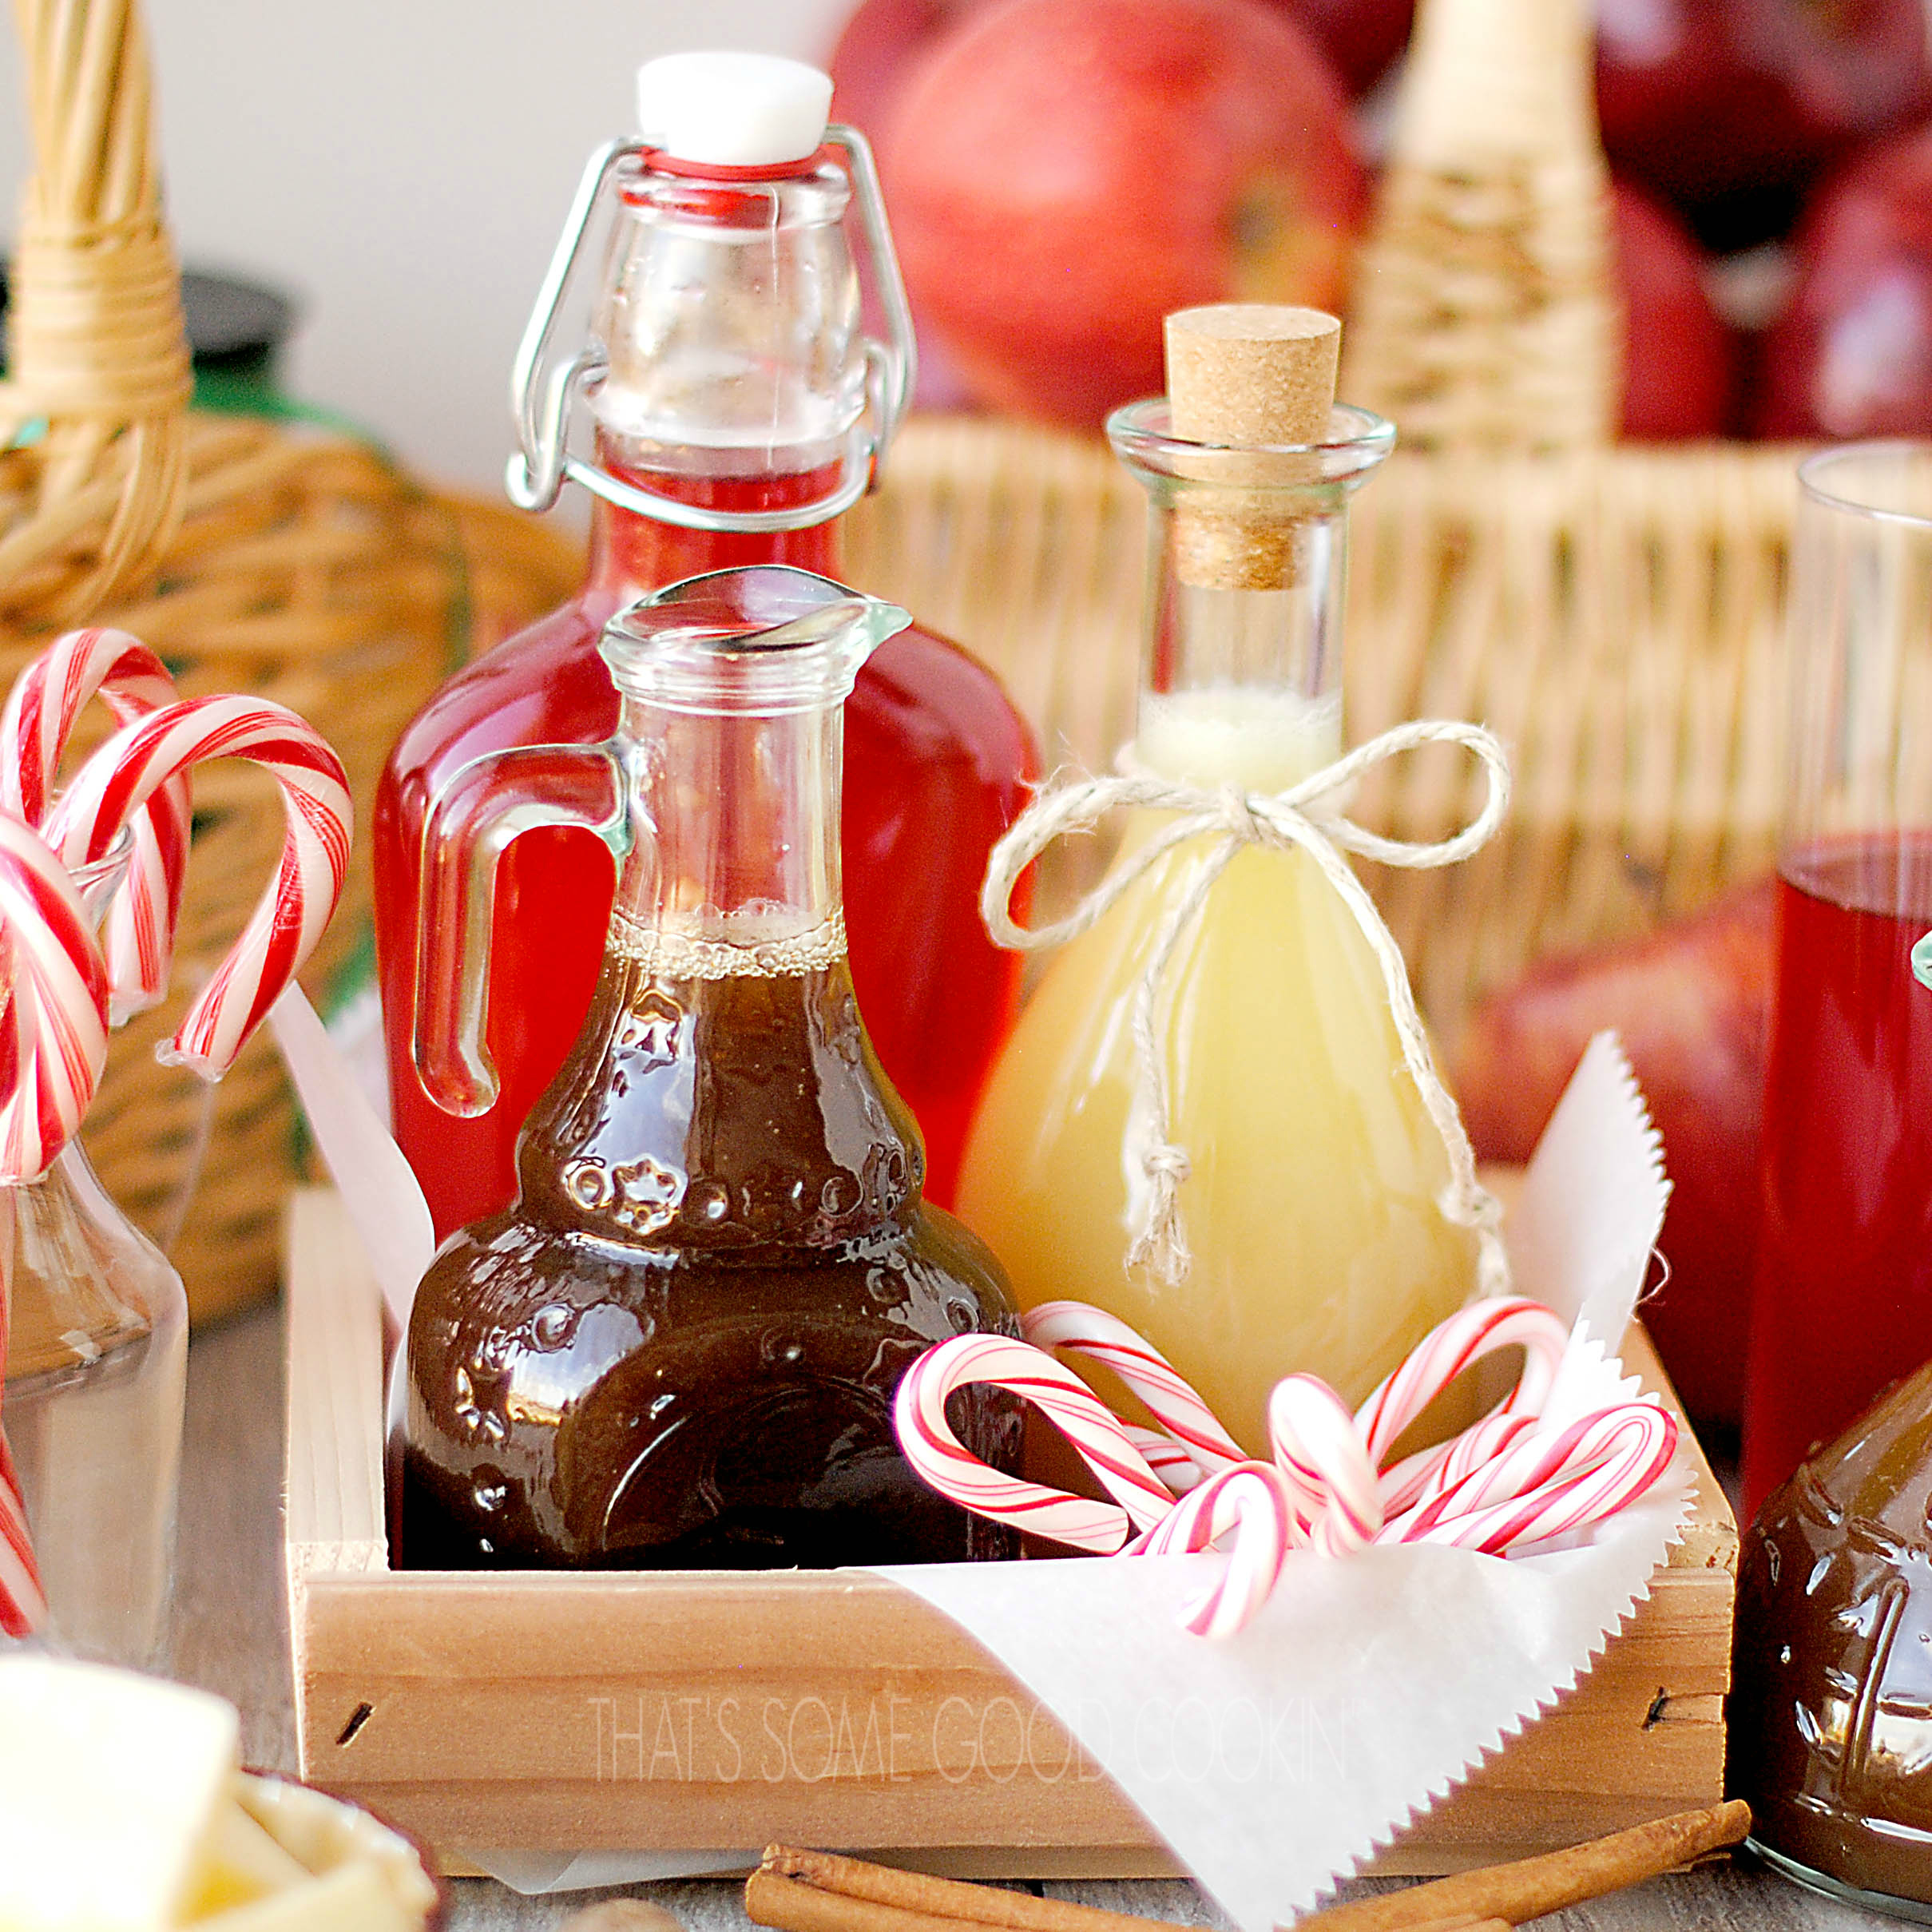 Apple Pie Syrup, Peppermint Candy Cane Syrup and Buttermilk Syrup